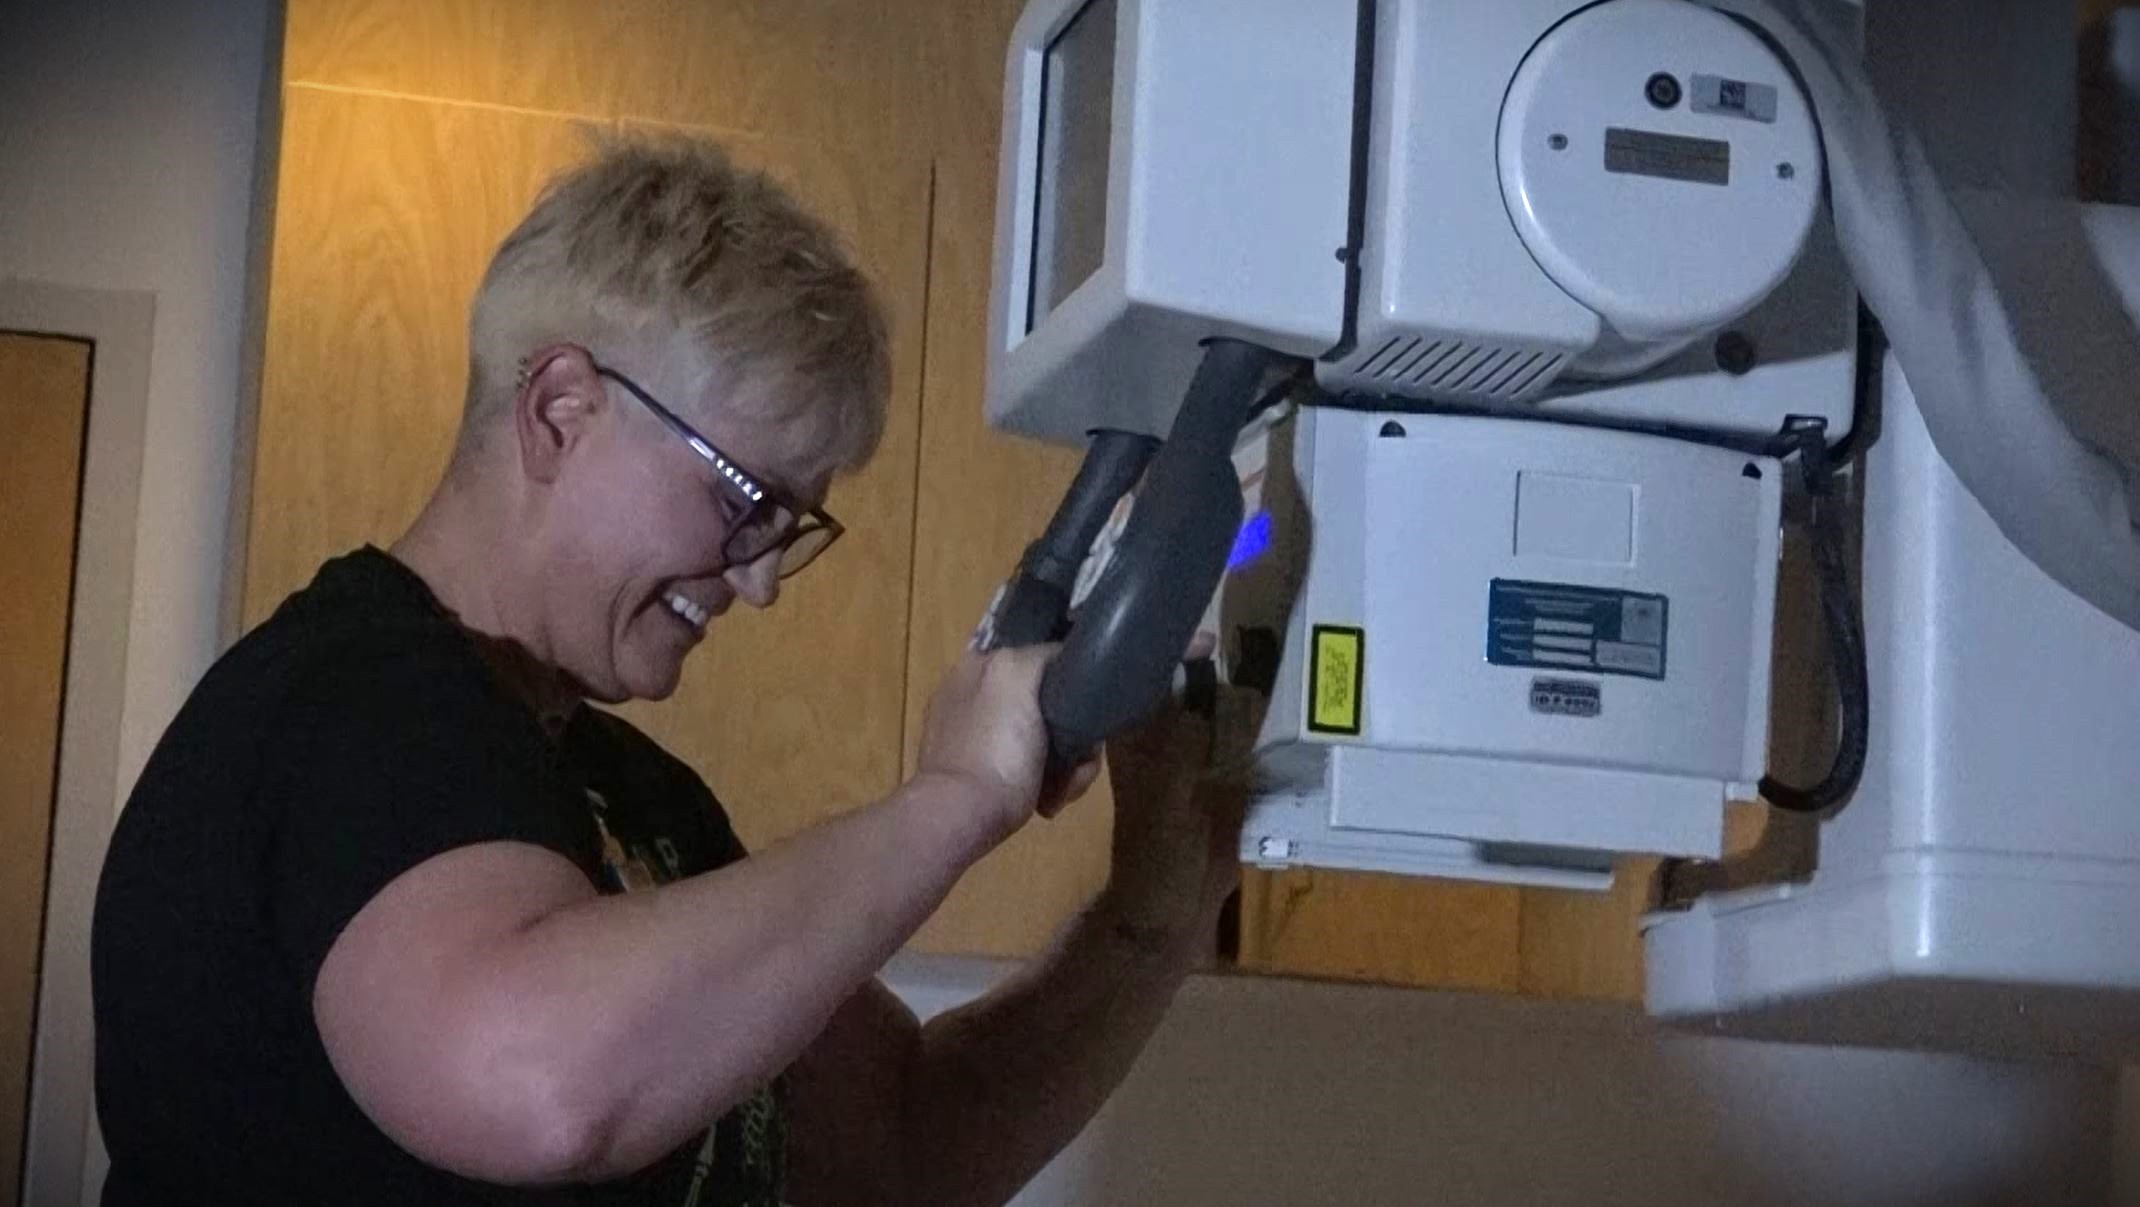 A person with short hair adjusts a medical imaging device in a clinical setting.